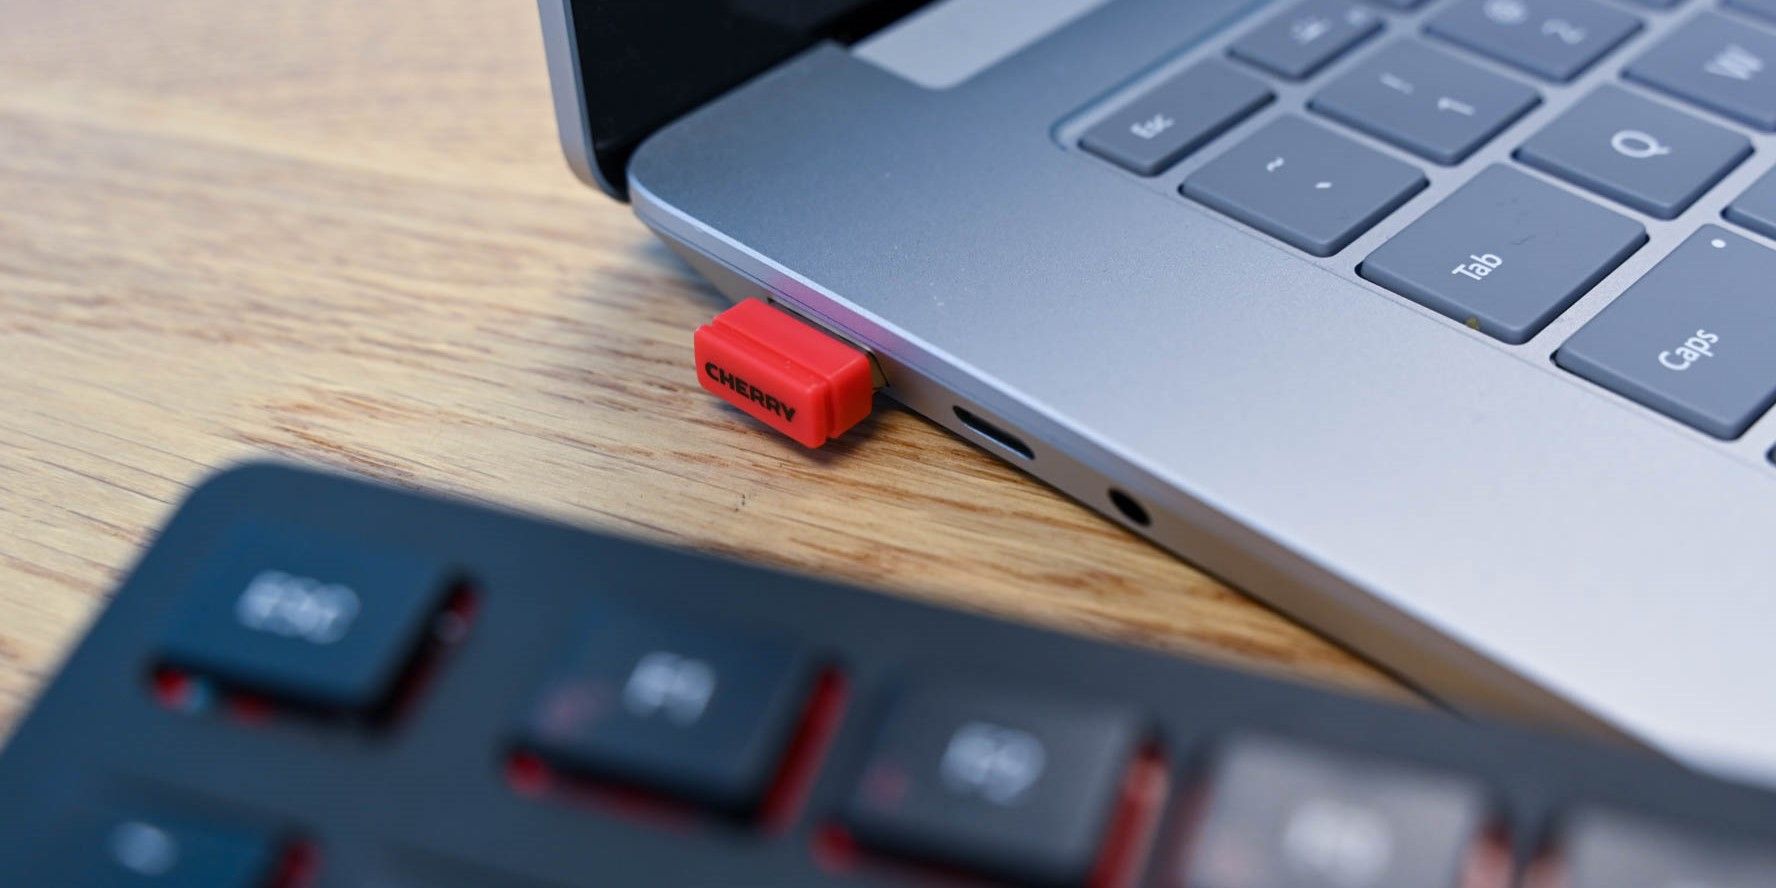 Cherry KW 9200 Mini Keyboard Bluetooth dongle in a laptop